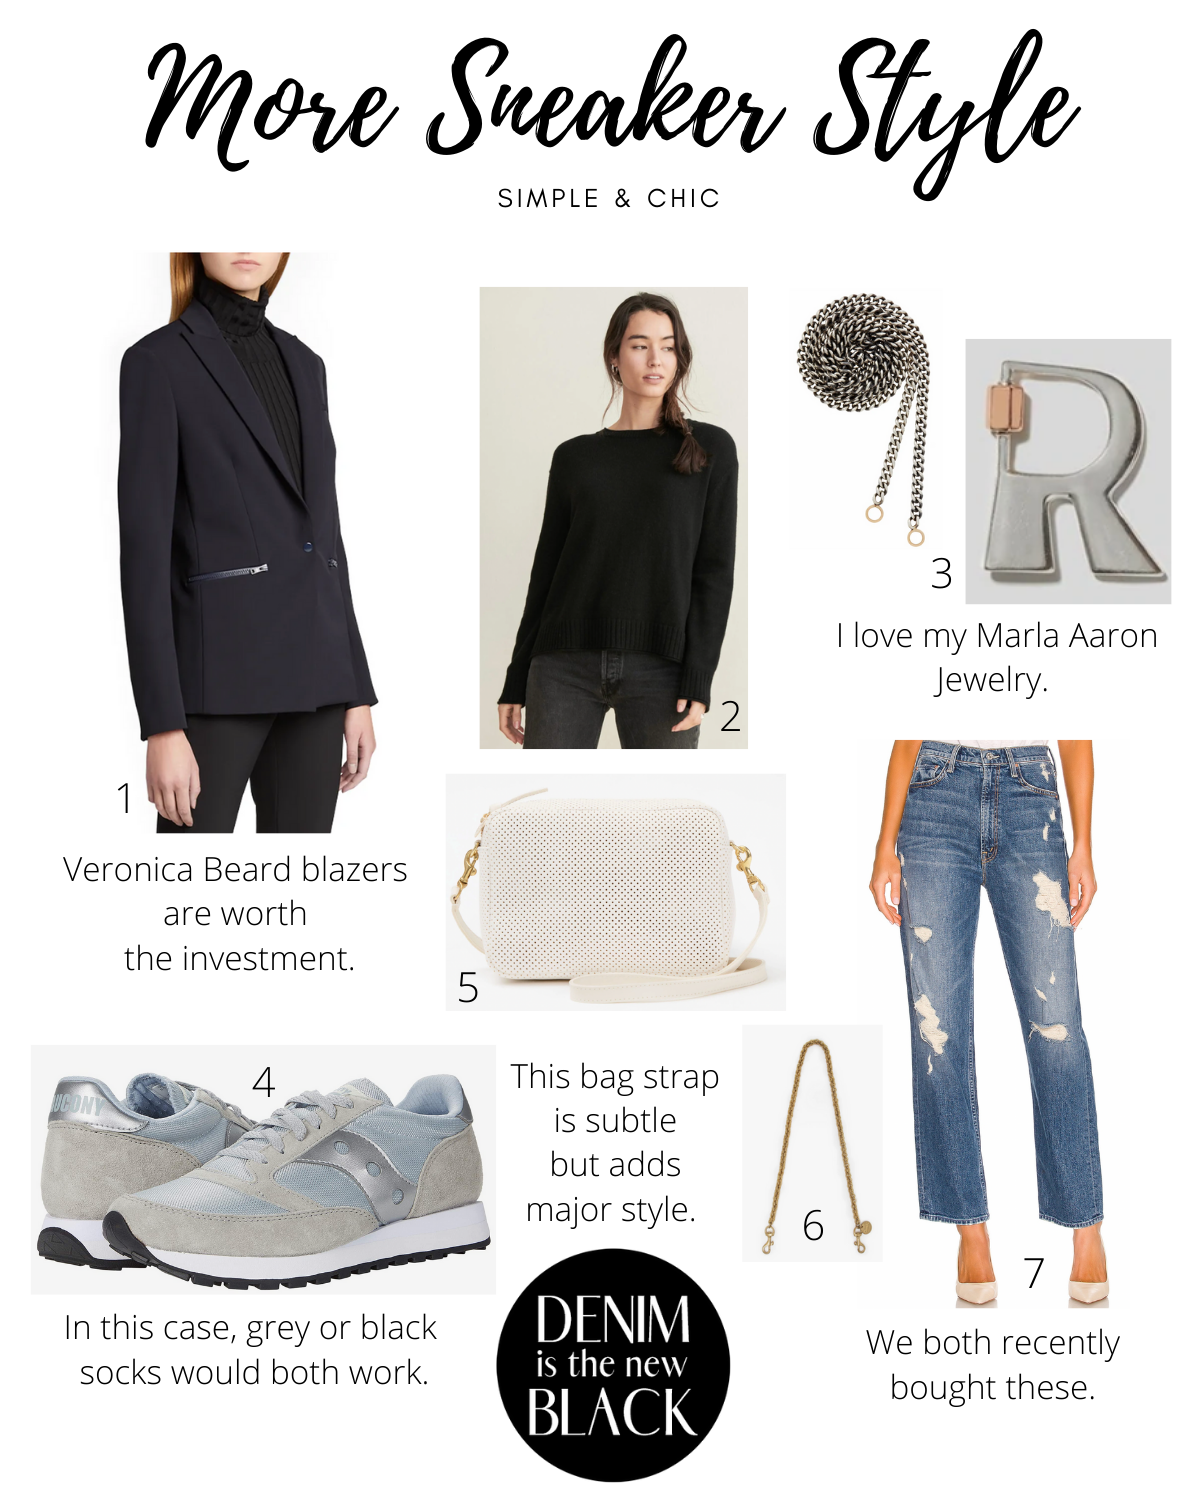 How to wear sneakers stylishly in winter - a simple and chic style board.